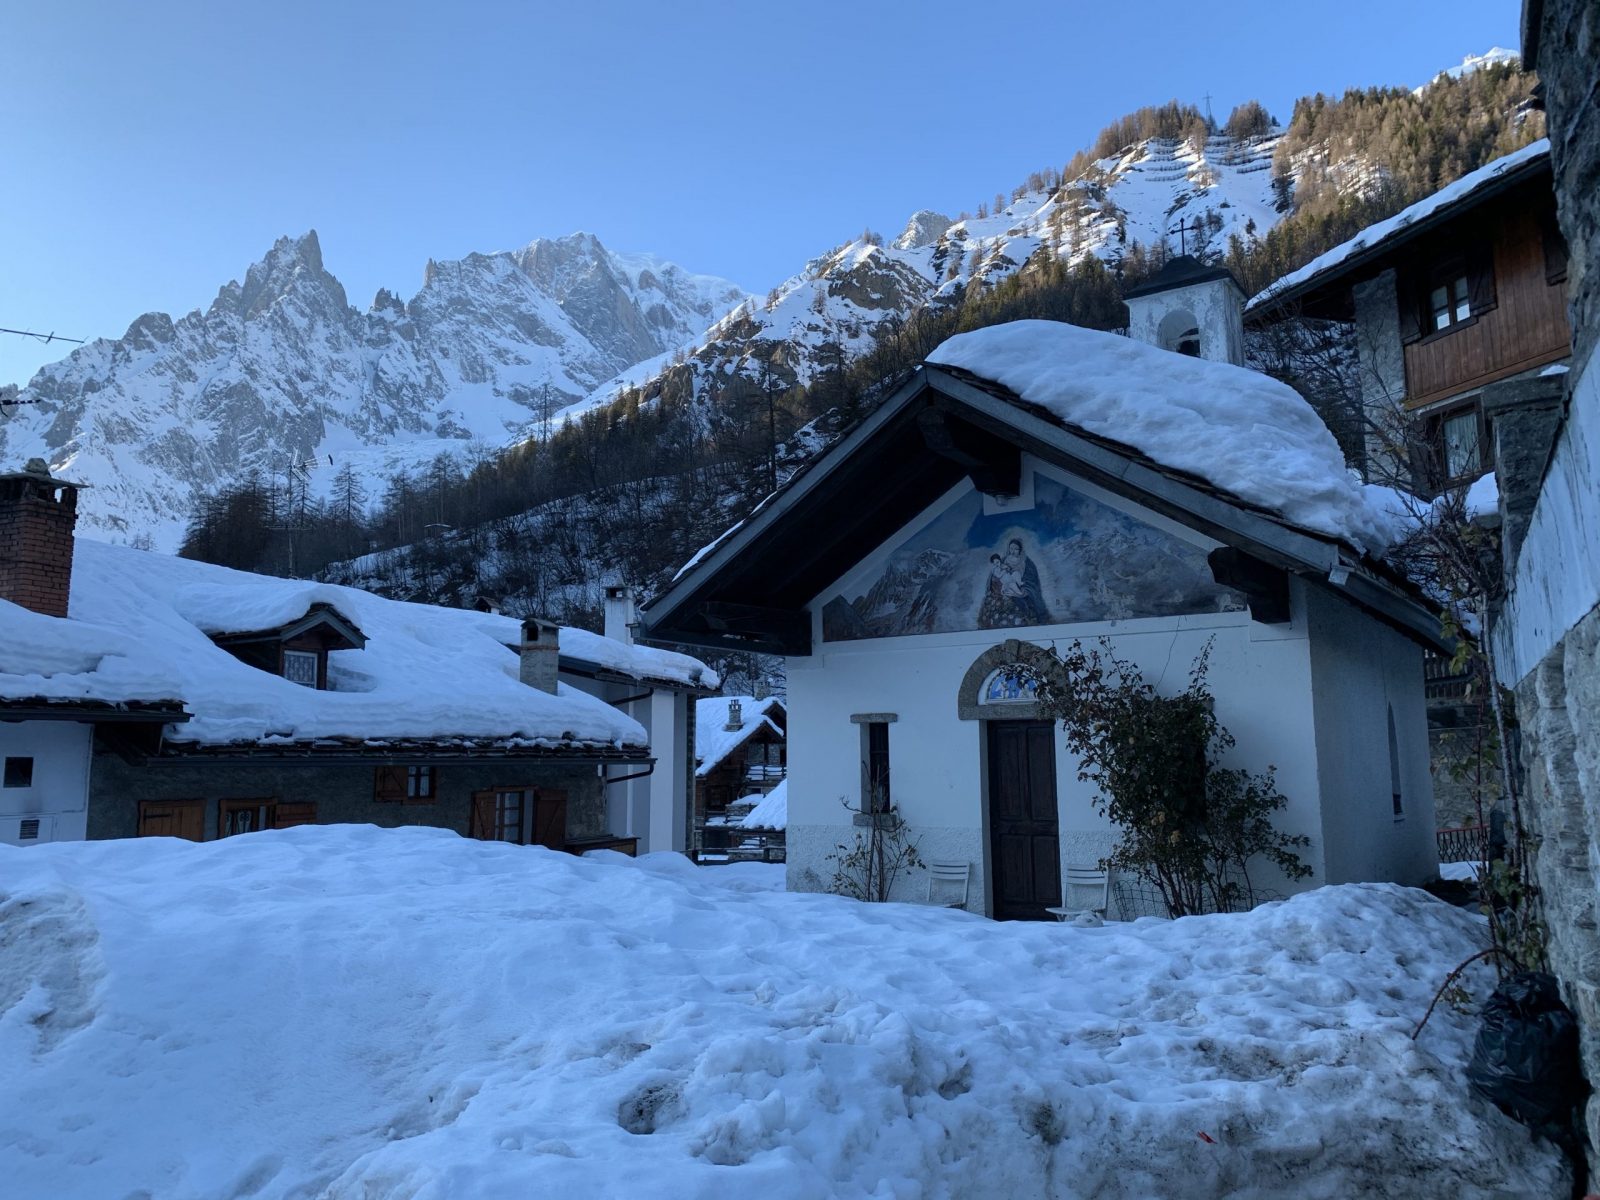 La Palud, on the way to Val Ferret. Our Christmas holidays in the mountains with the kids and our dog! Courmayeur, Aosta.